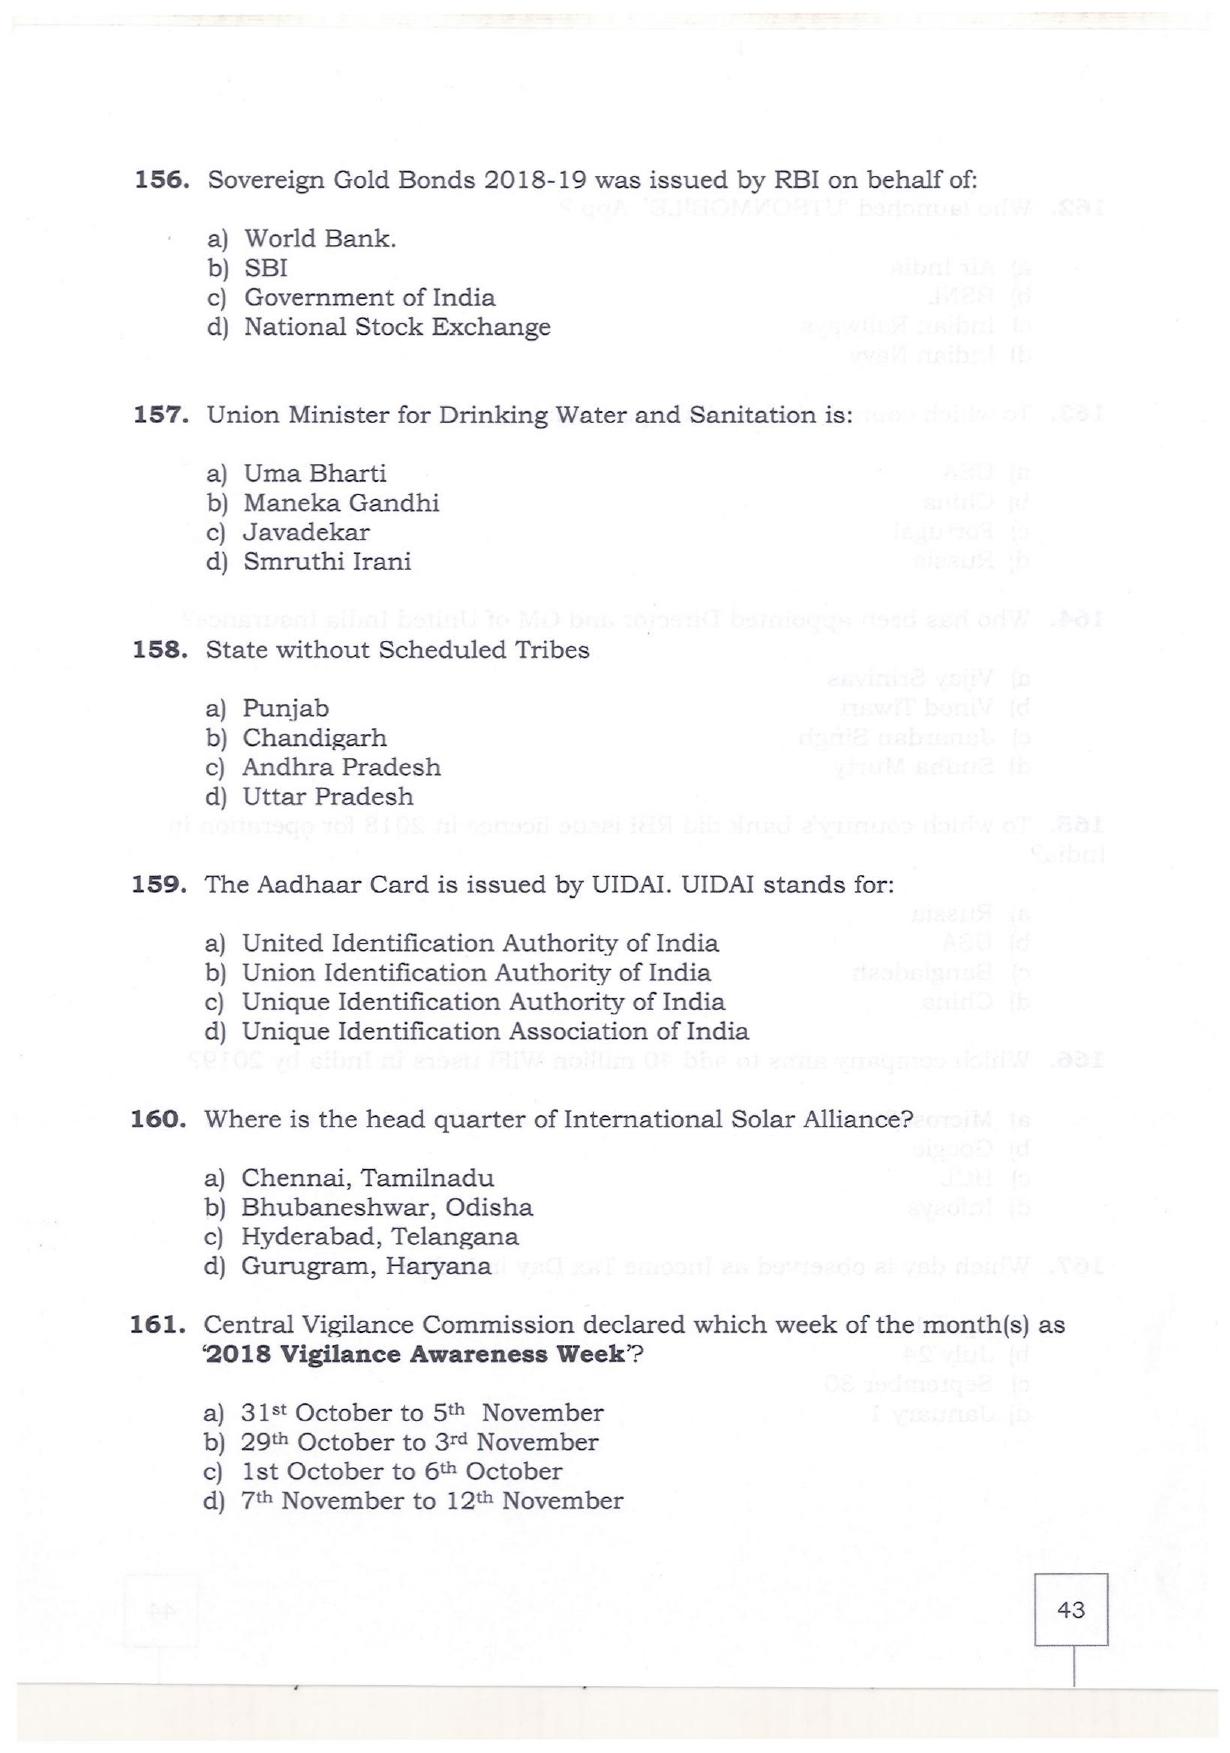 KMAT Question Papers - February 2019 - Page 41